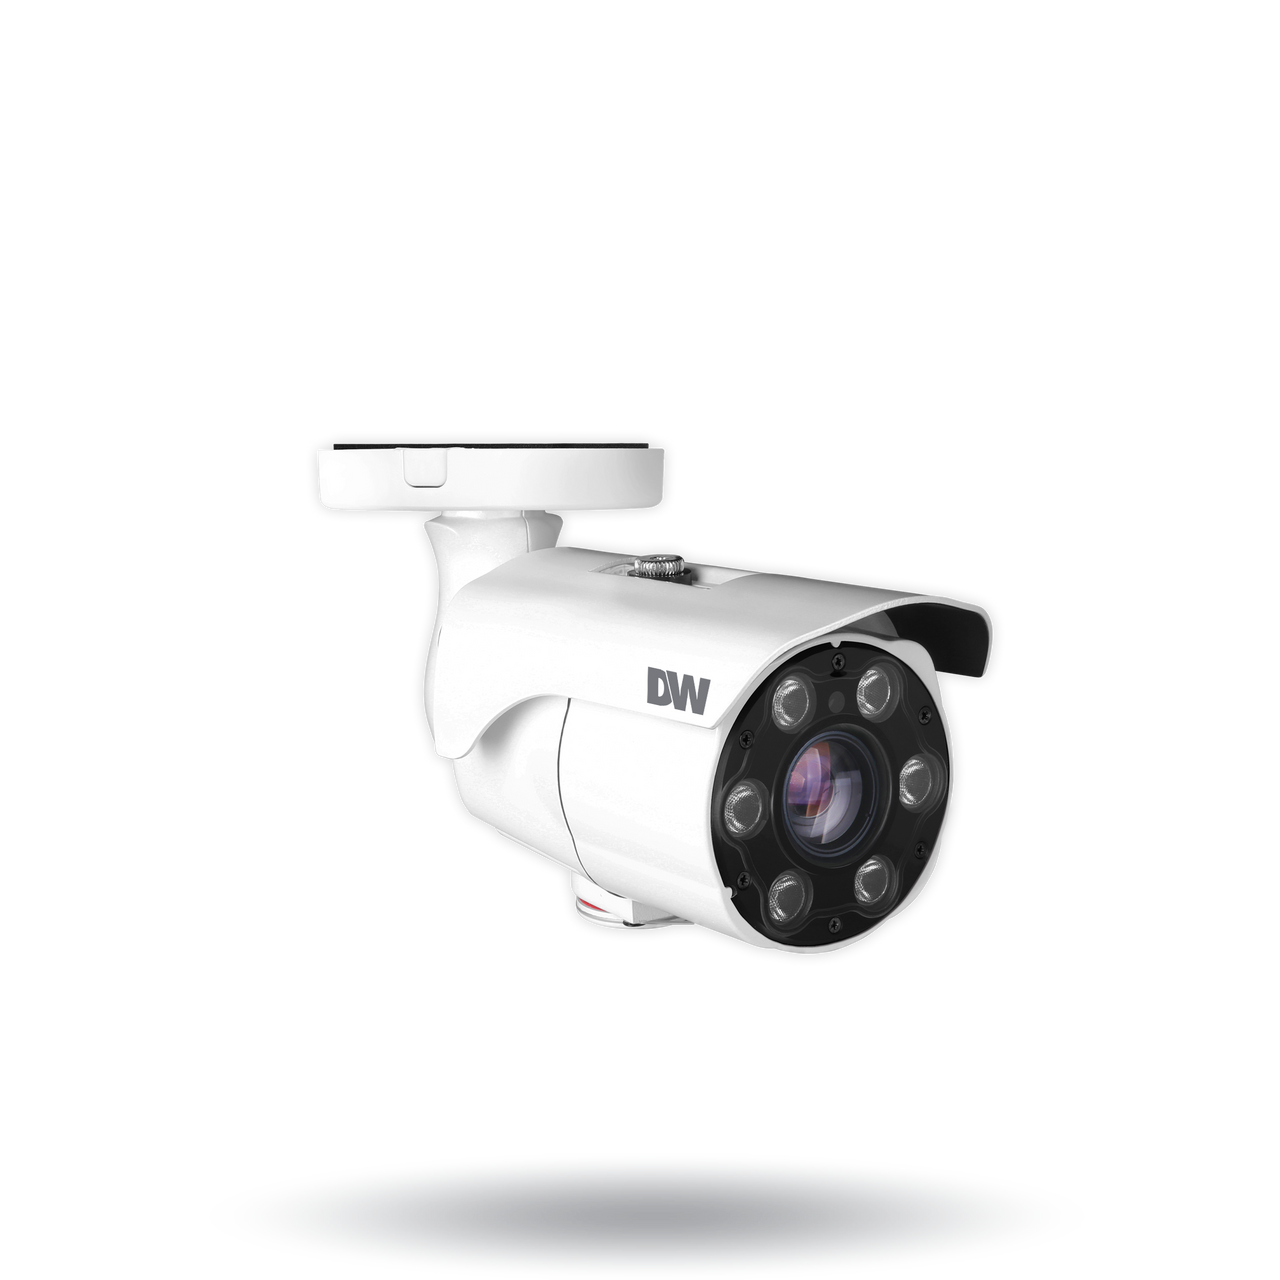 Digital Watchdog DWC-MPB45WiATW 5MP Outdoor Bullet IP Security Camera with 2.7~13.5mm Lens and Intelligent Video Analytics Plus